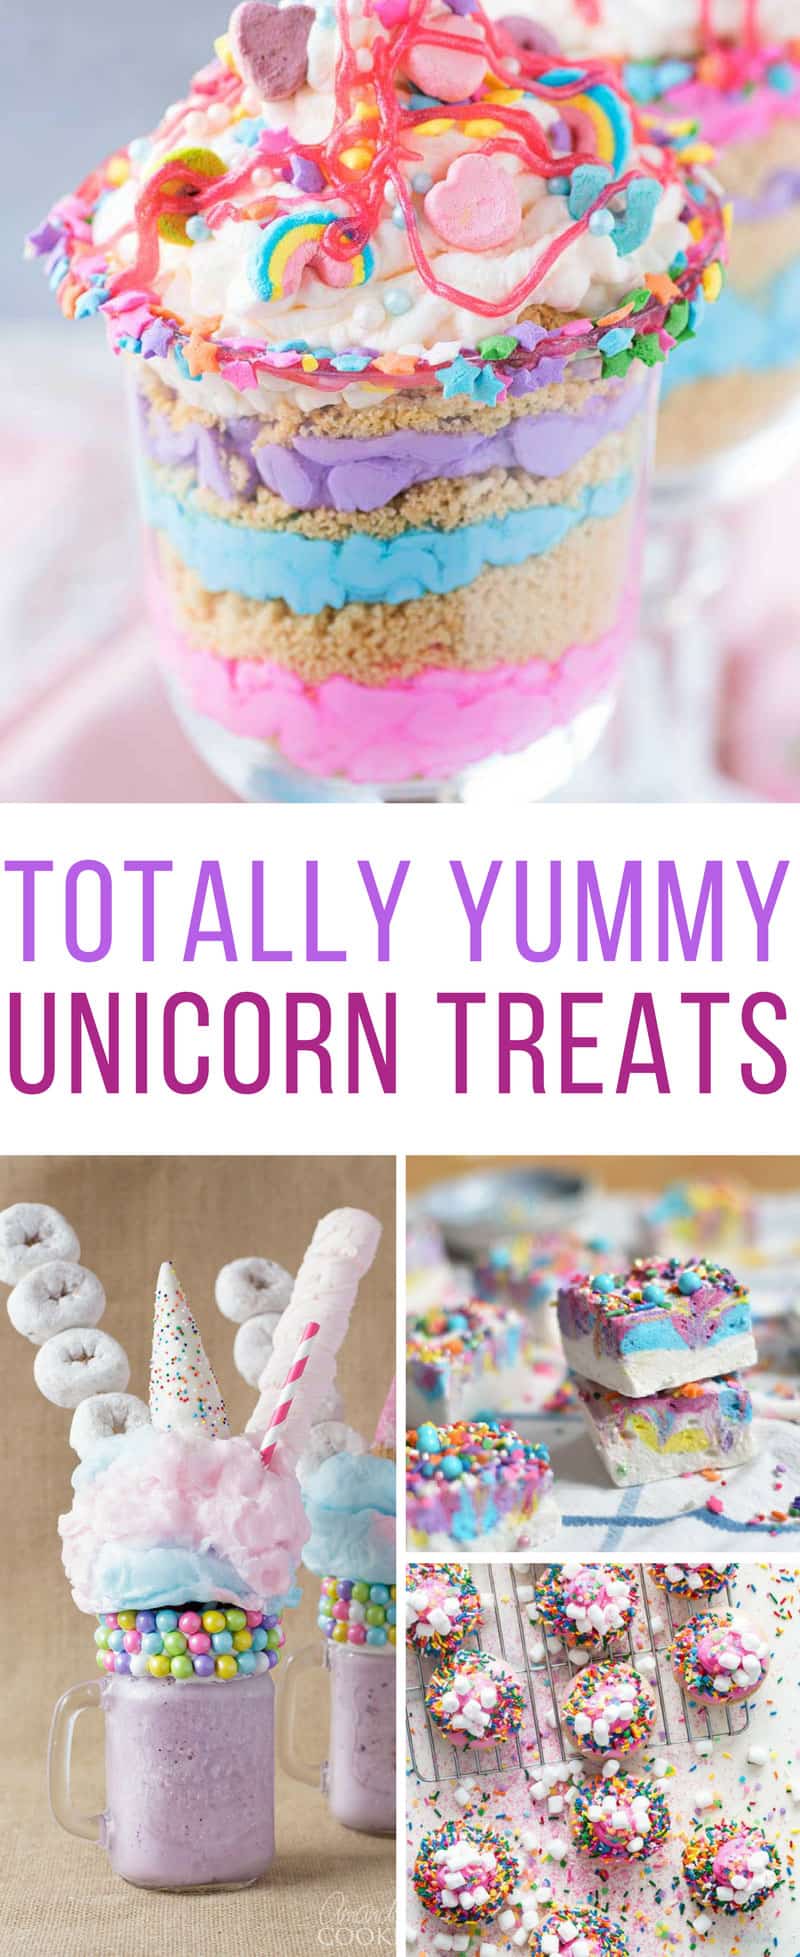 These unicorn treats are amazing! Perfect for a party!